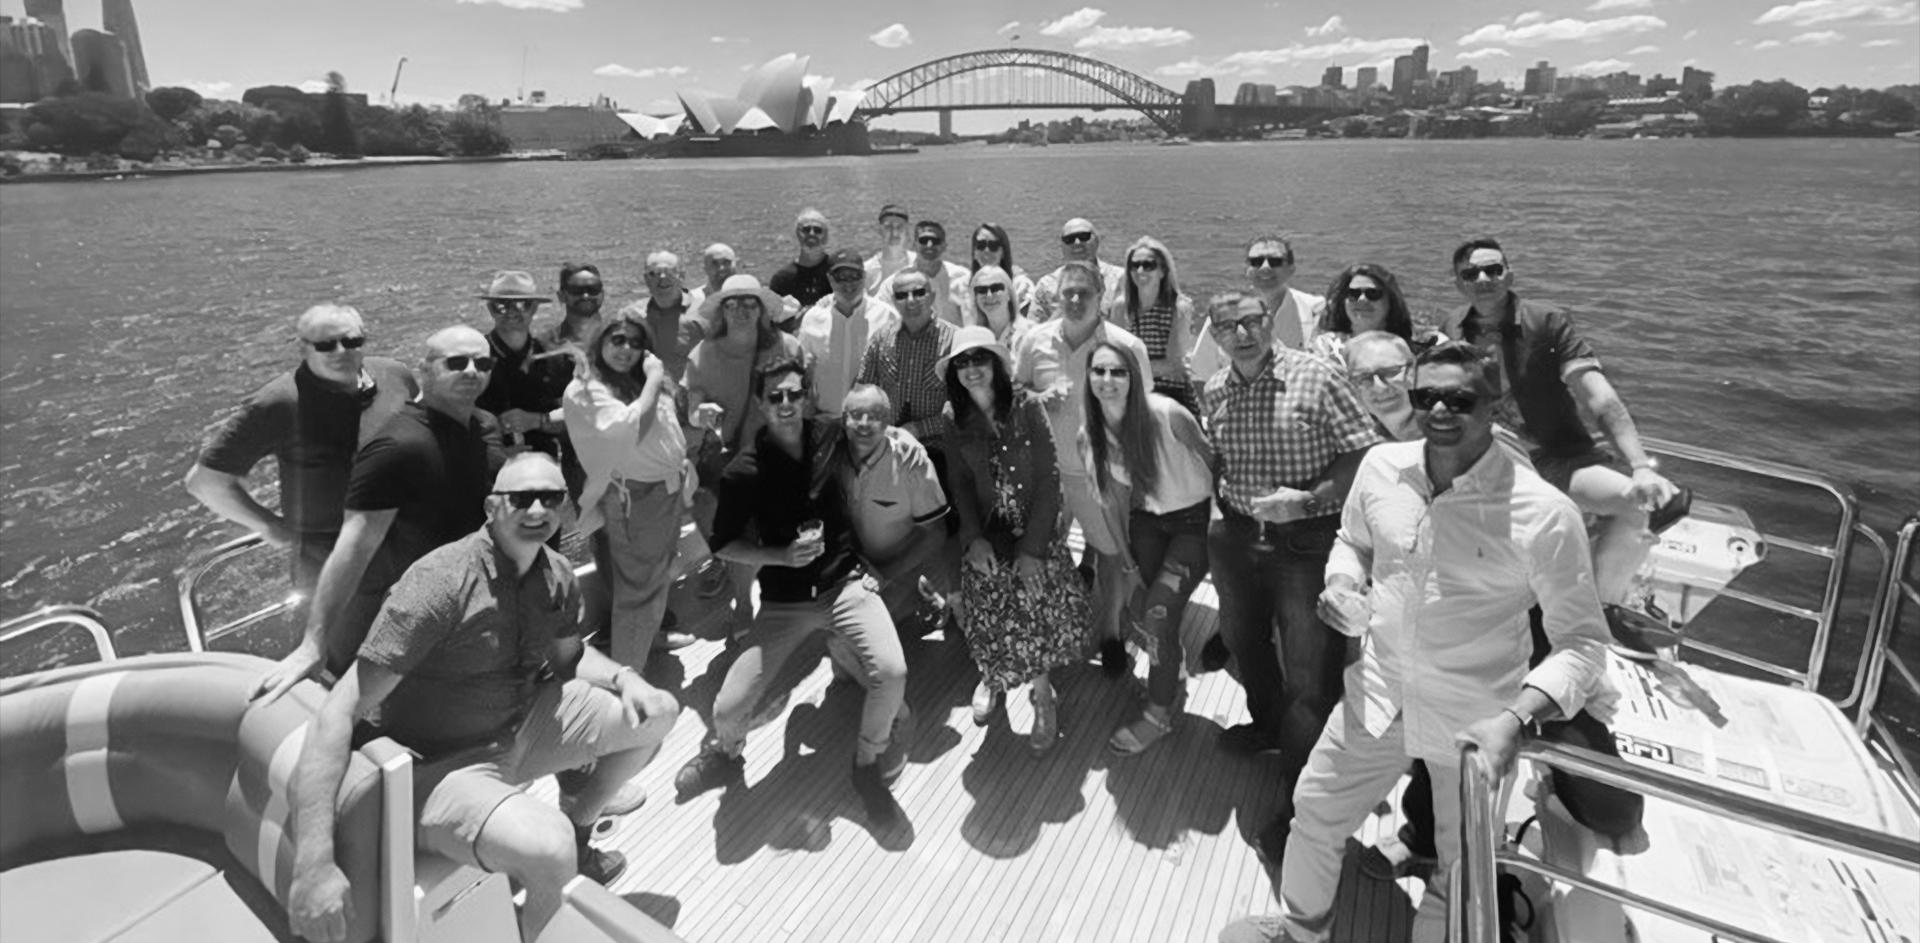 Black and white photograph of a group of people on a boat in the Sydney harbour with the Sydney Harbour Bridge in the background